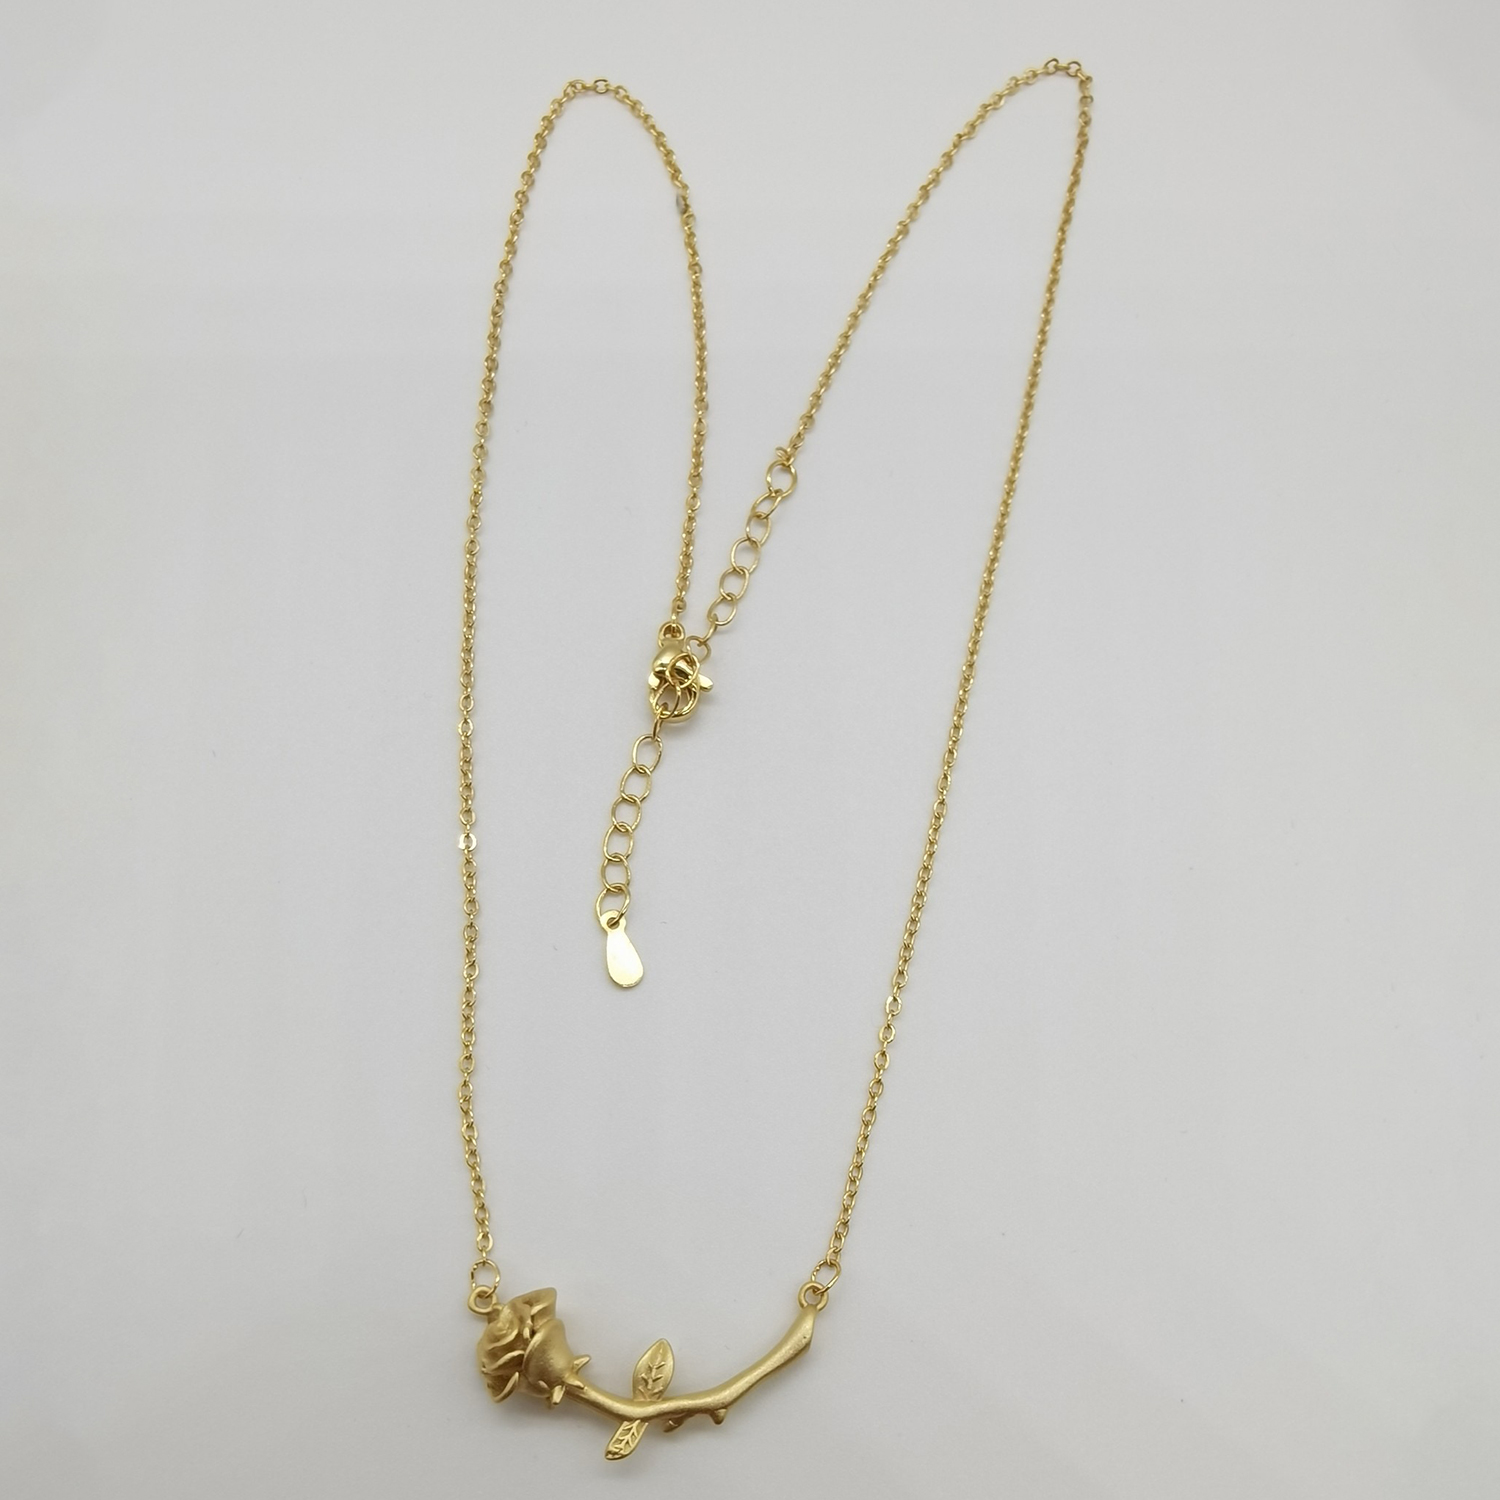 Alluvial gold vacuum electroplating 24K gold rose necklace